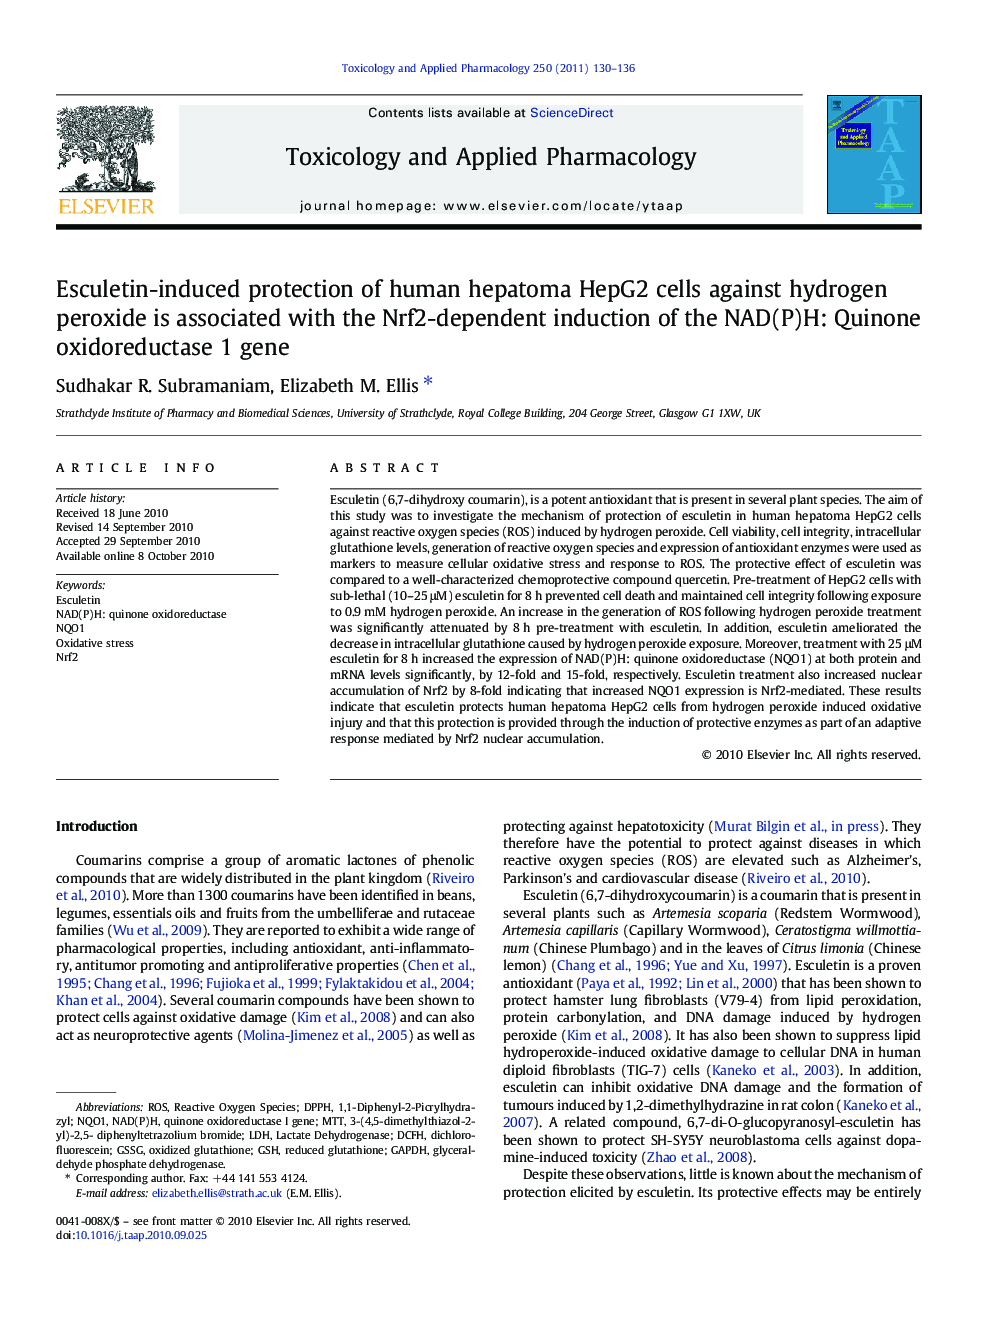 Esculetin-induced protection of human hepatoma HepG2 cells against hydrogen peroxide is associated with the Nrf2-dependent induction of the NAD(P)H: Quinone oxidoreductase 1 gene